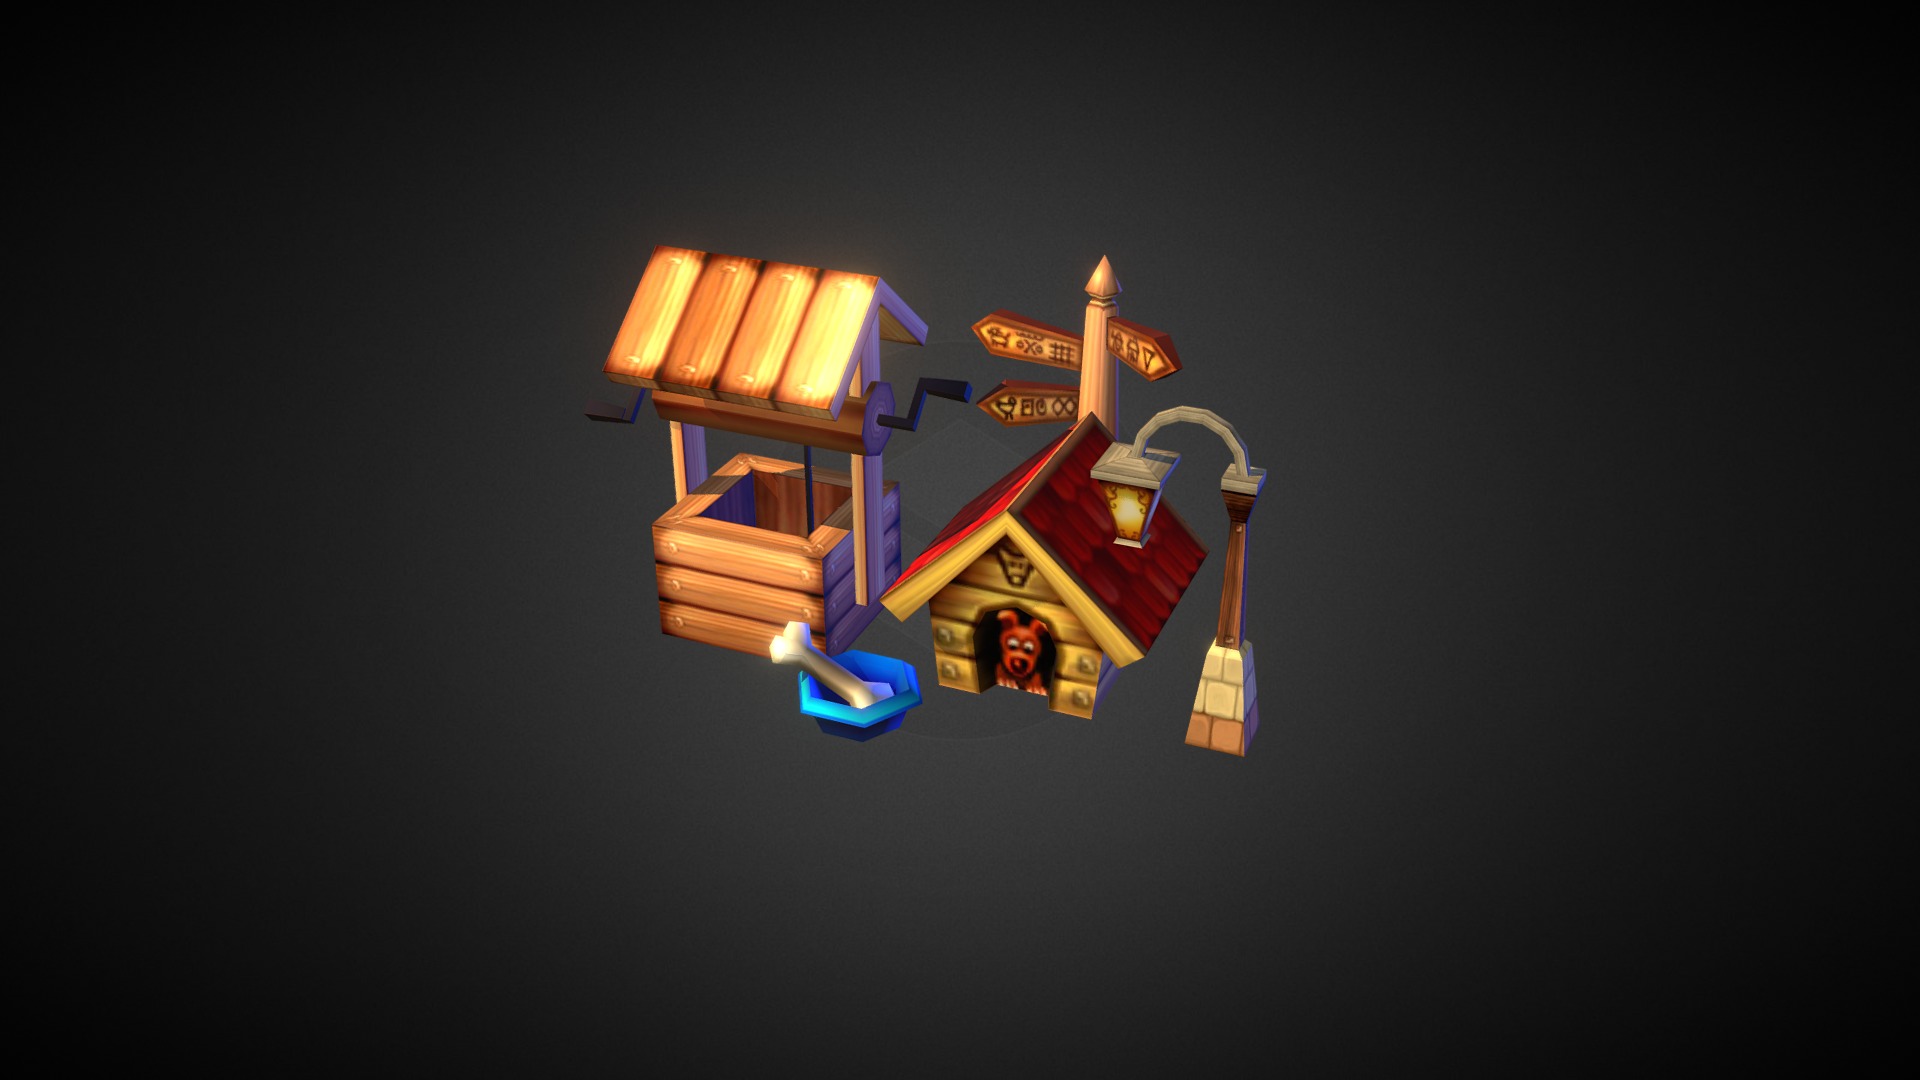 3D model Lowpoly Dog House - This is a 3D model of the Lowpoly Dog House. The 3D model is about a toy building with lights.